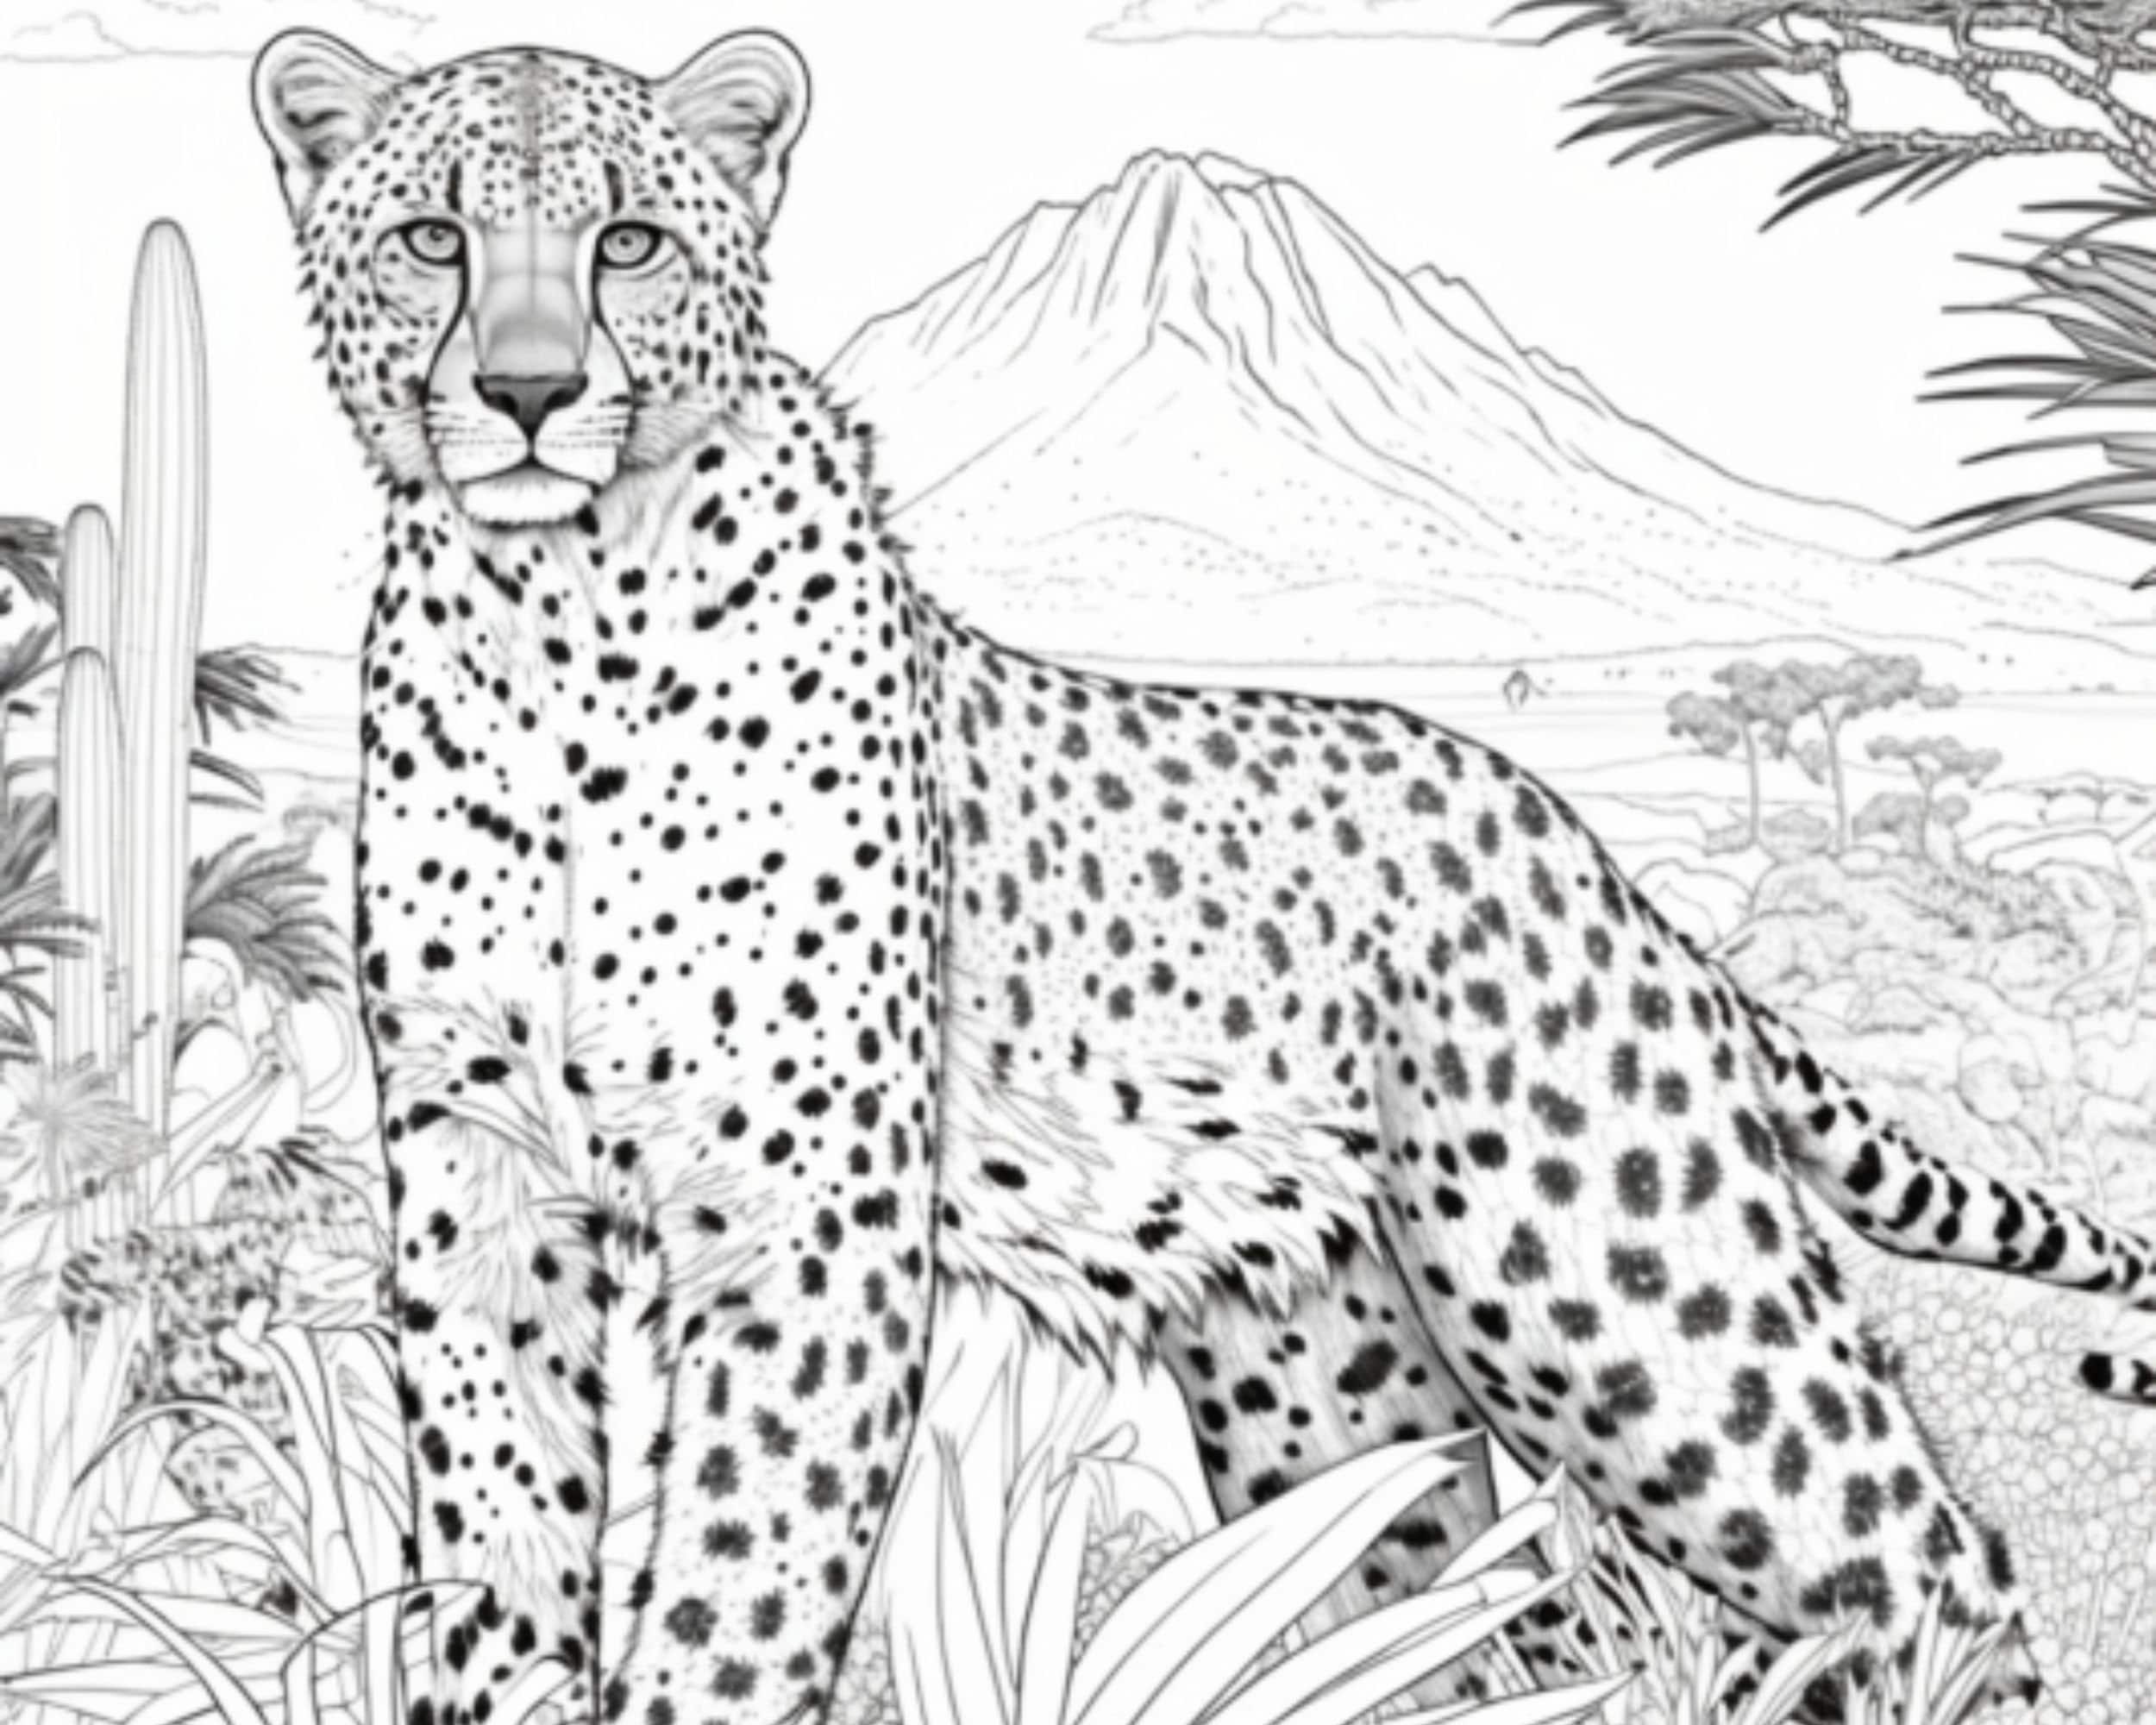 Cheetah coloring pages elegant black white outlined printable pdf in us letter and a size digital download